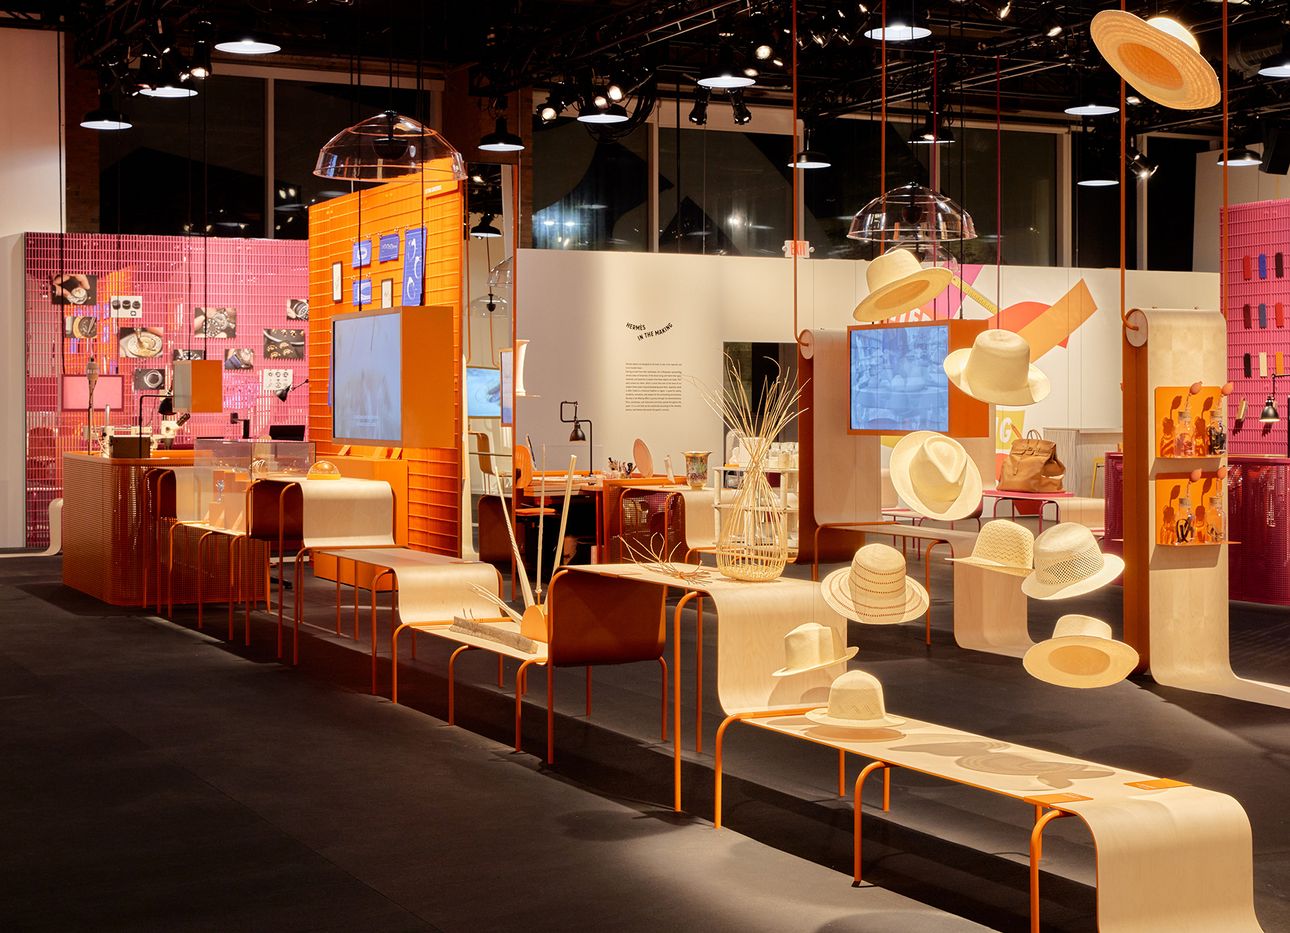 Installation view of the “Hermès in the Making” exhibition in Troy, Michigan. (Photo: William Jess Laird)